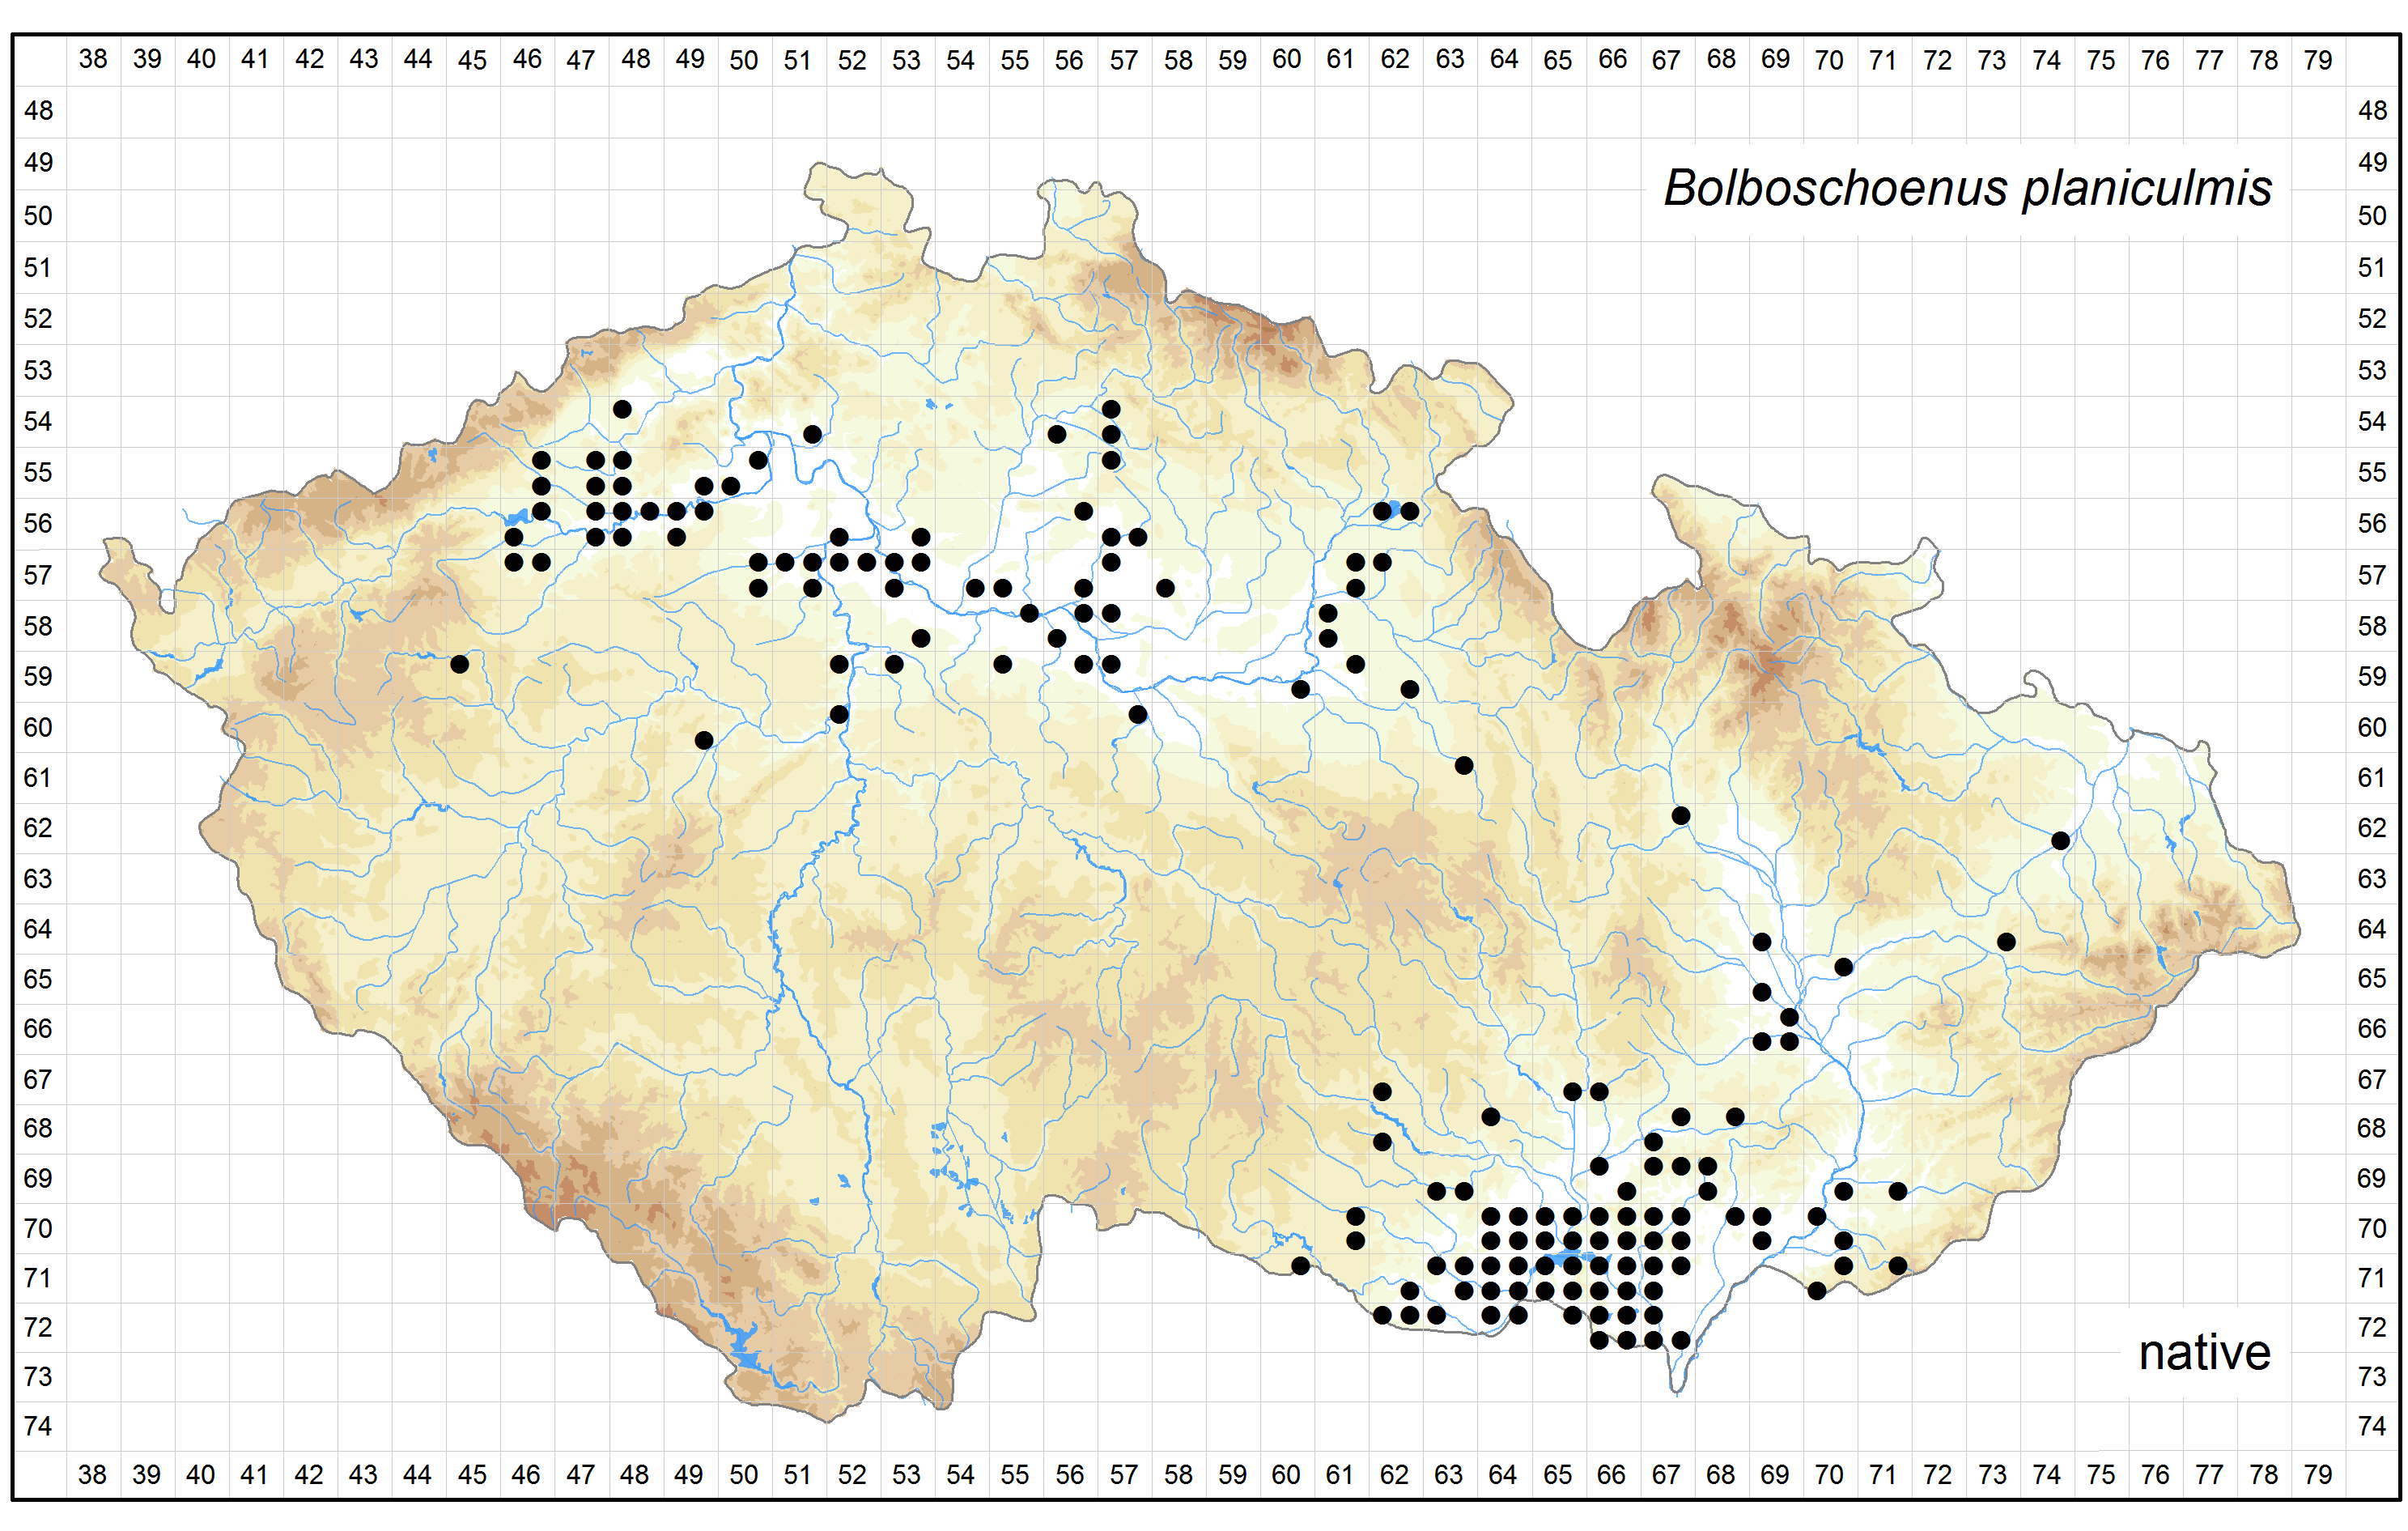 Distribution of Bolboschoenus planiculmis in the Czech Republic Author of the map: Michal Ducháček, Zdenka Hroudová Map produced on: 18-11-2015 Database records used for producing the distribution